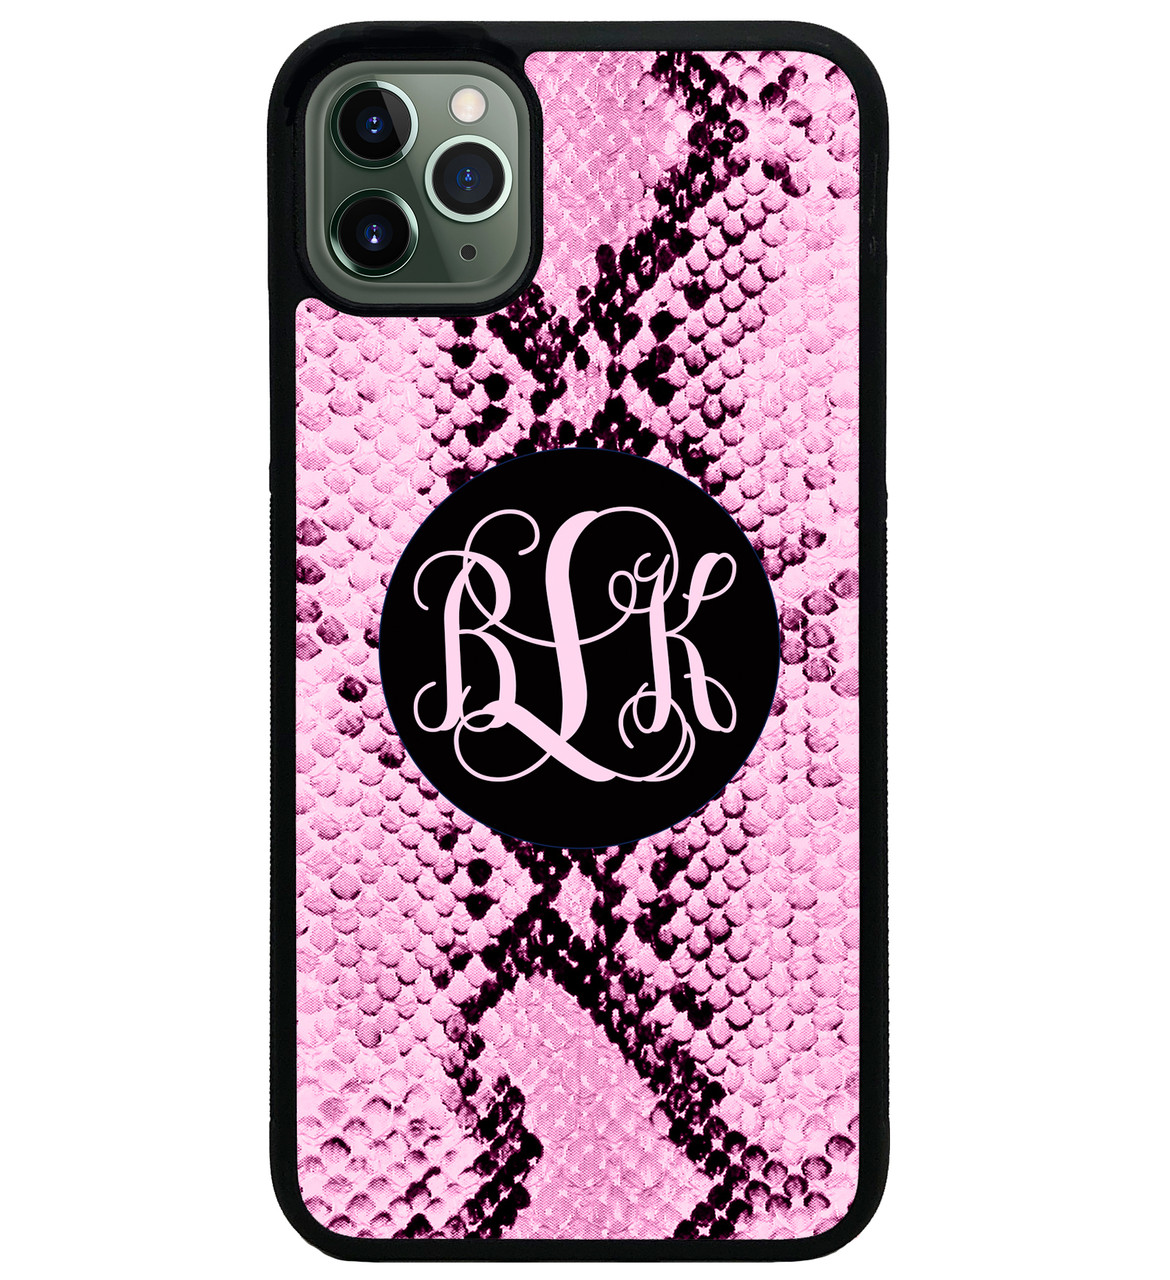 iPhone 13 Pro Max Cases, Personalised iPhone Cases